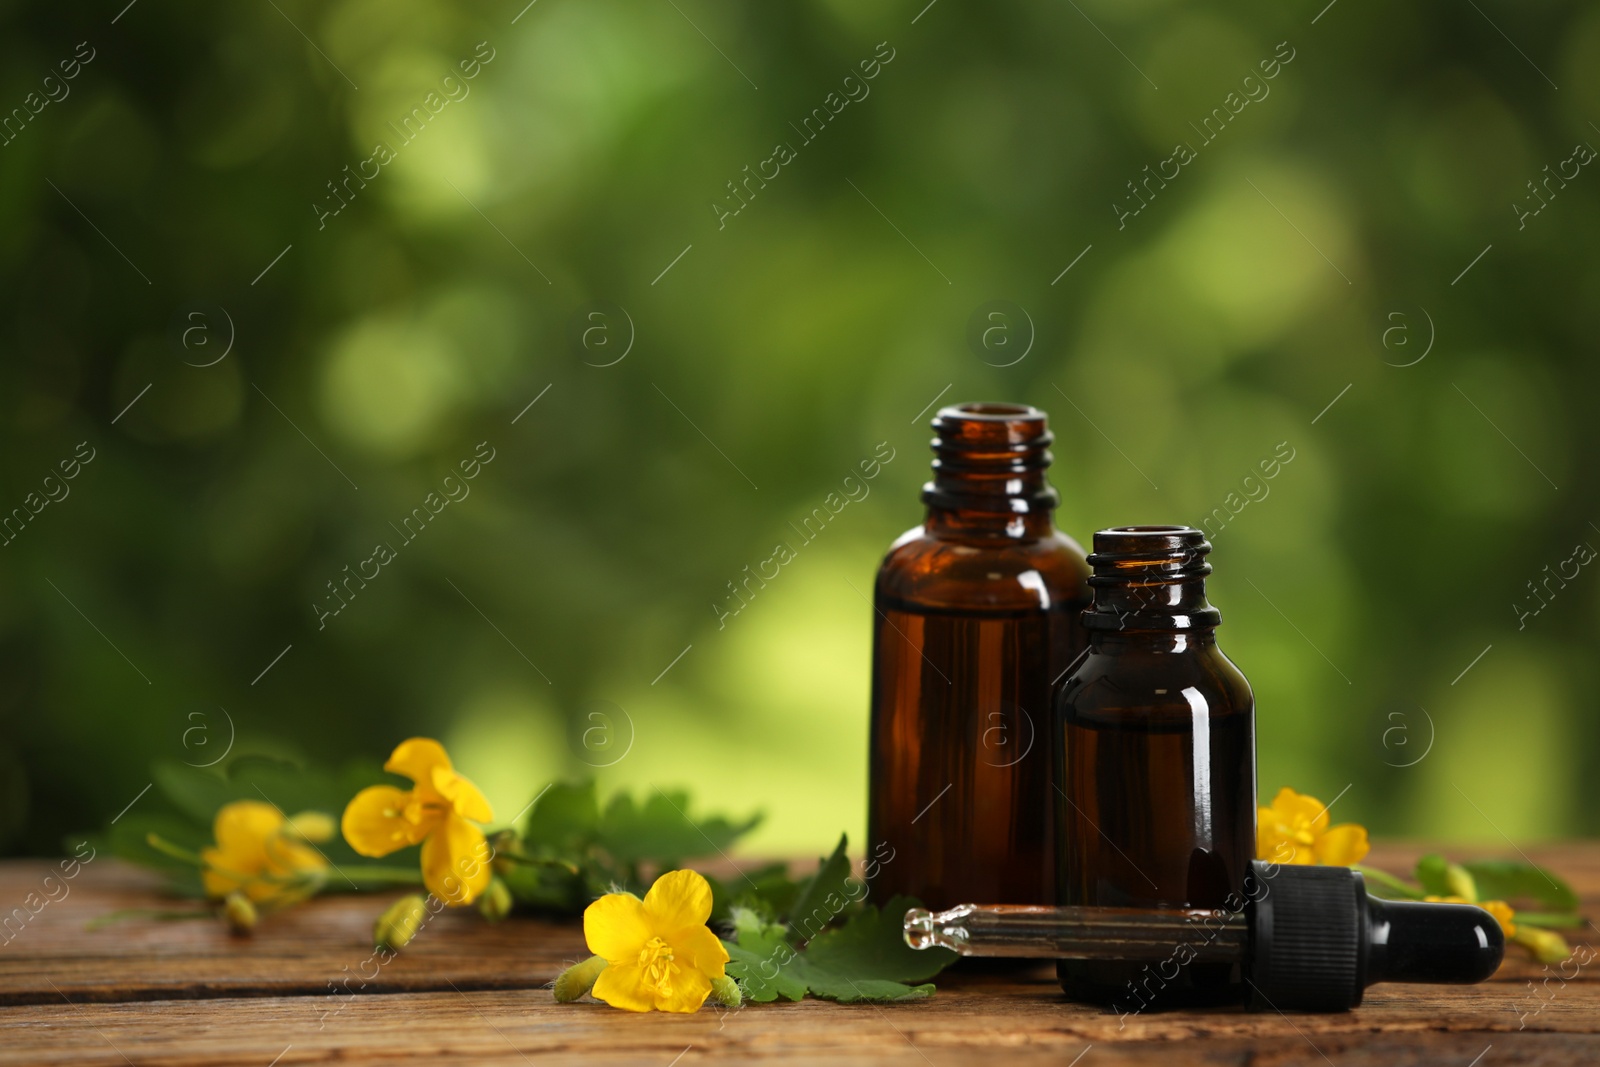 Photo of Bottles of natural celandine oil near flowers on wooden table outdoors, space for text